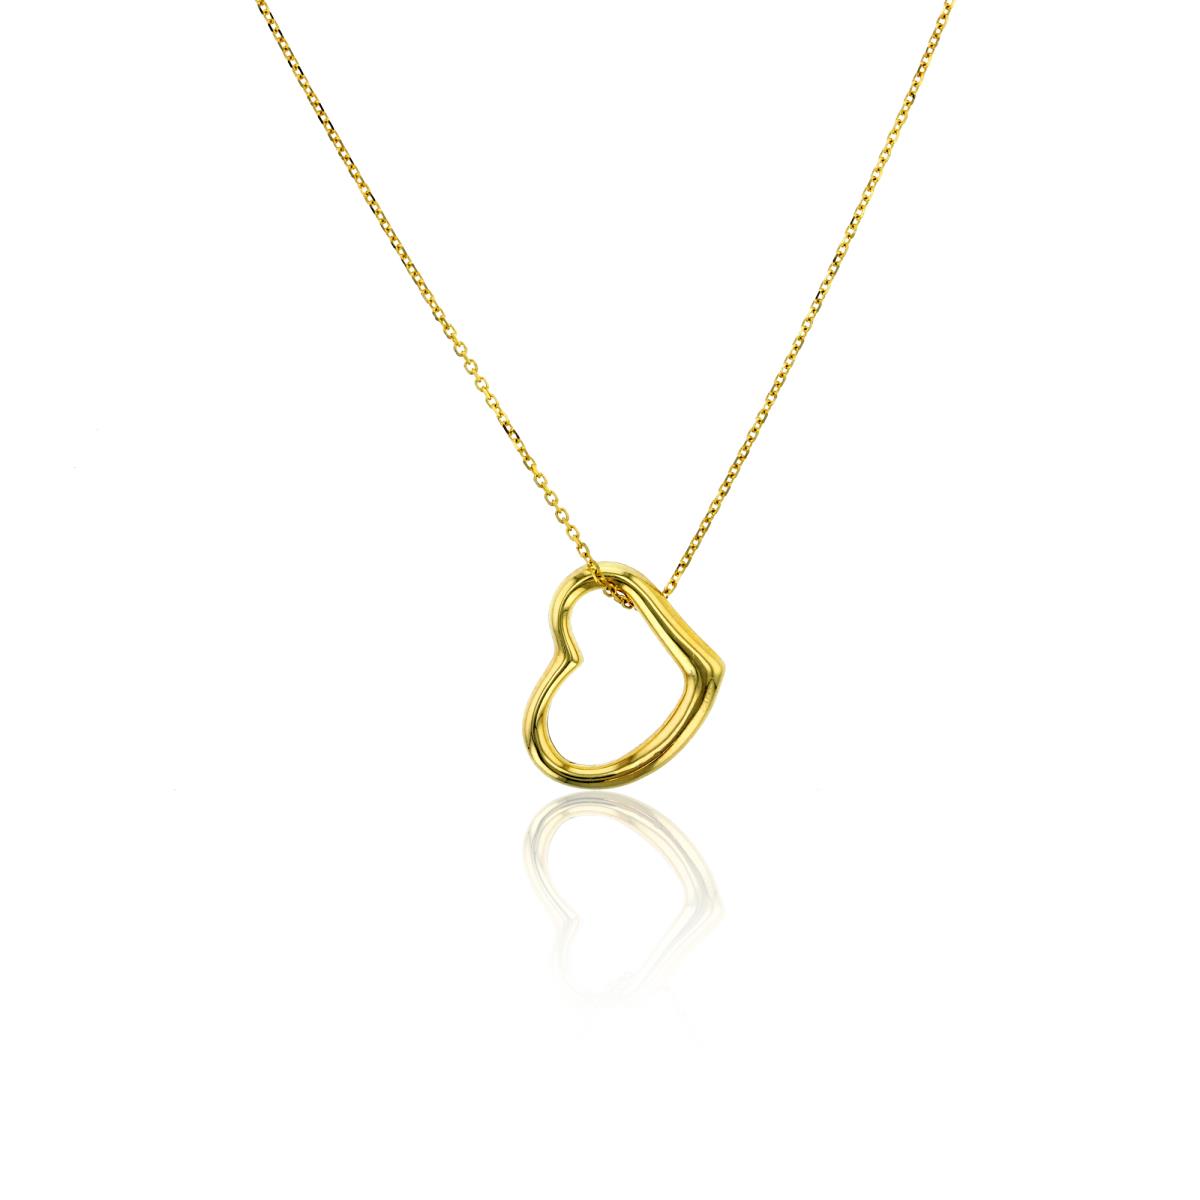 10K Yellow Gold Polished Open Heart 17" Necklace